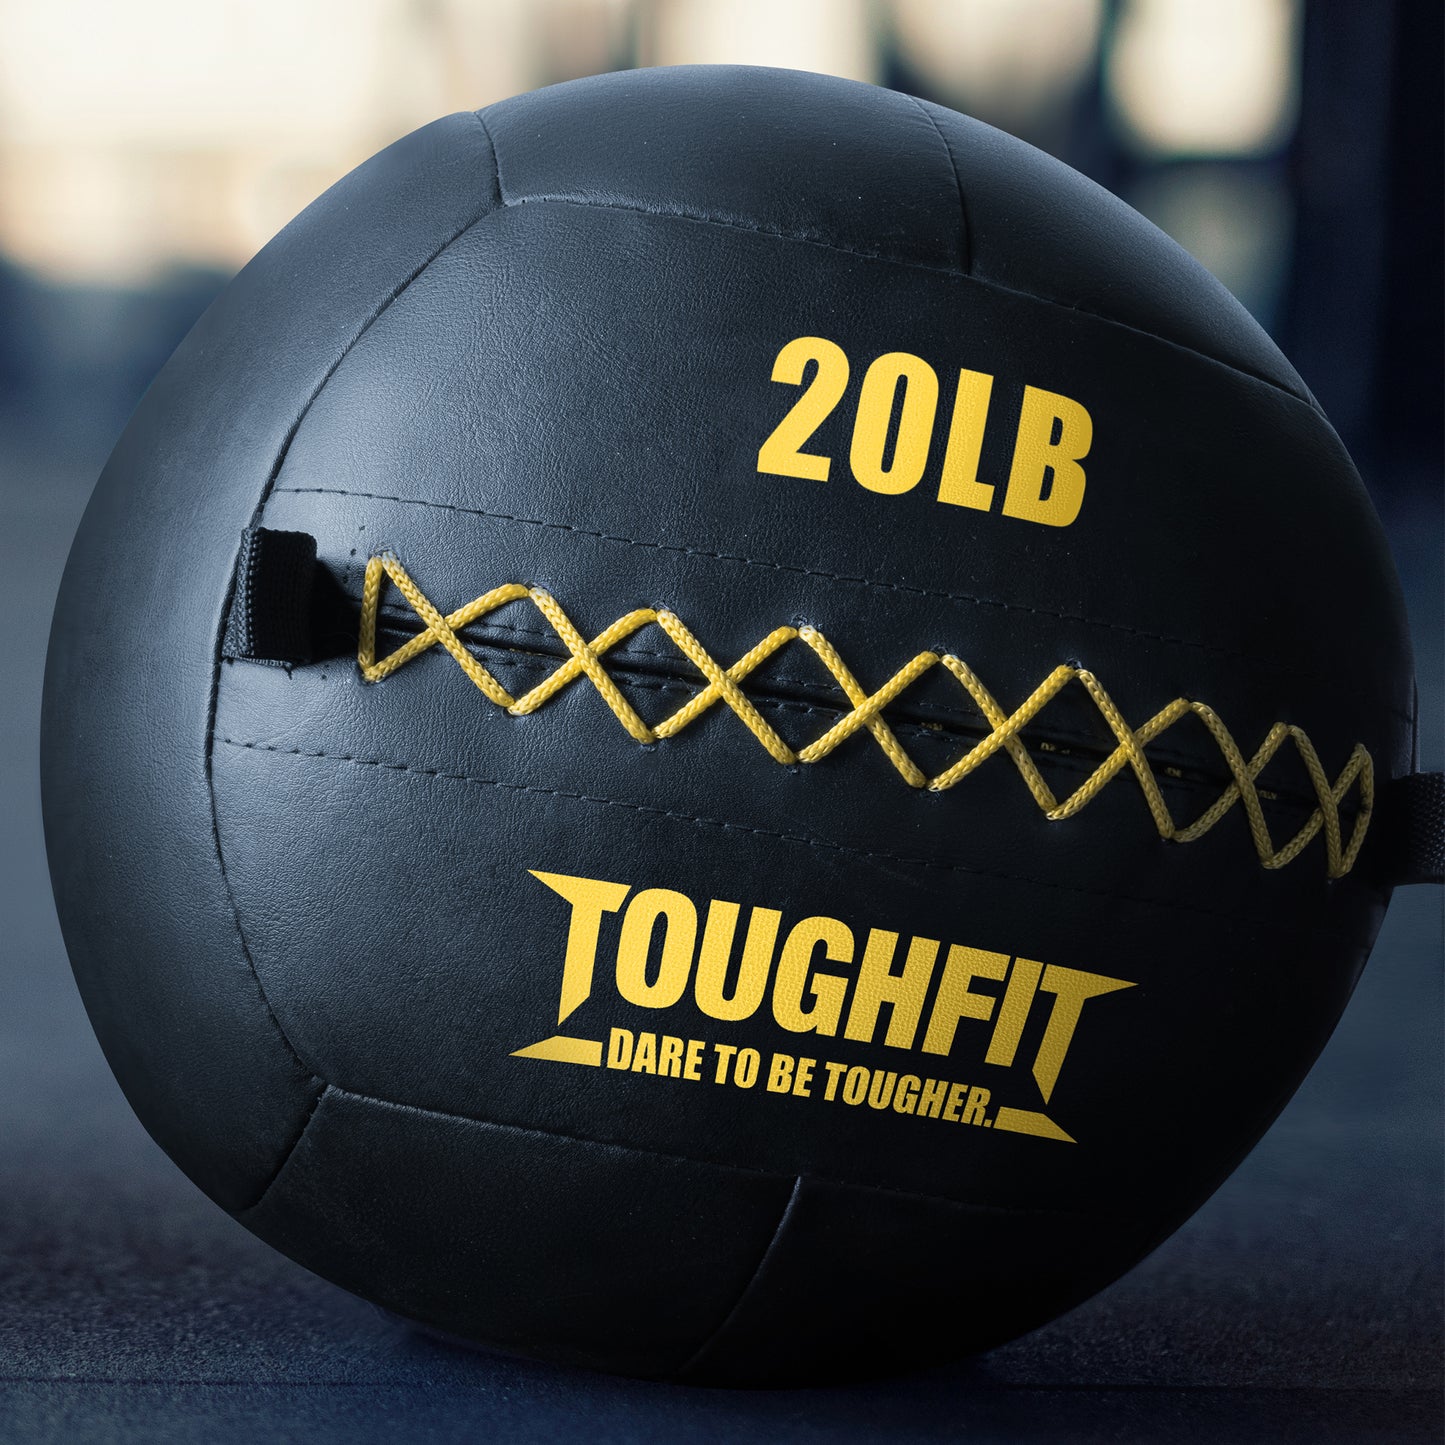 ToughFit Soft Leather Medicine Wall Ball